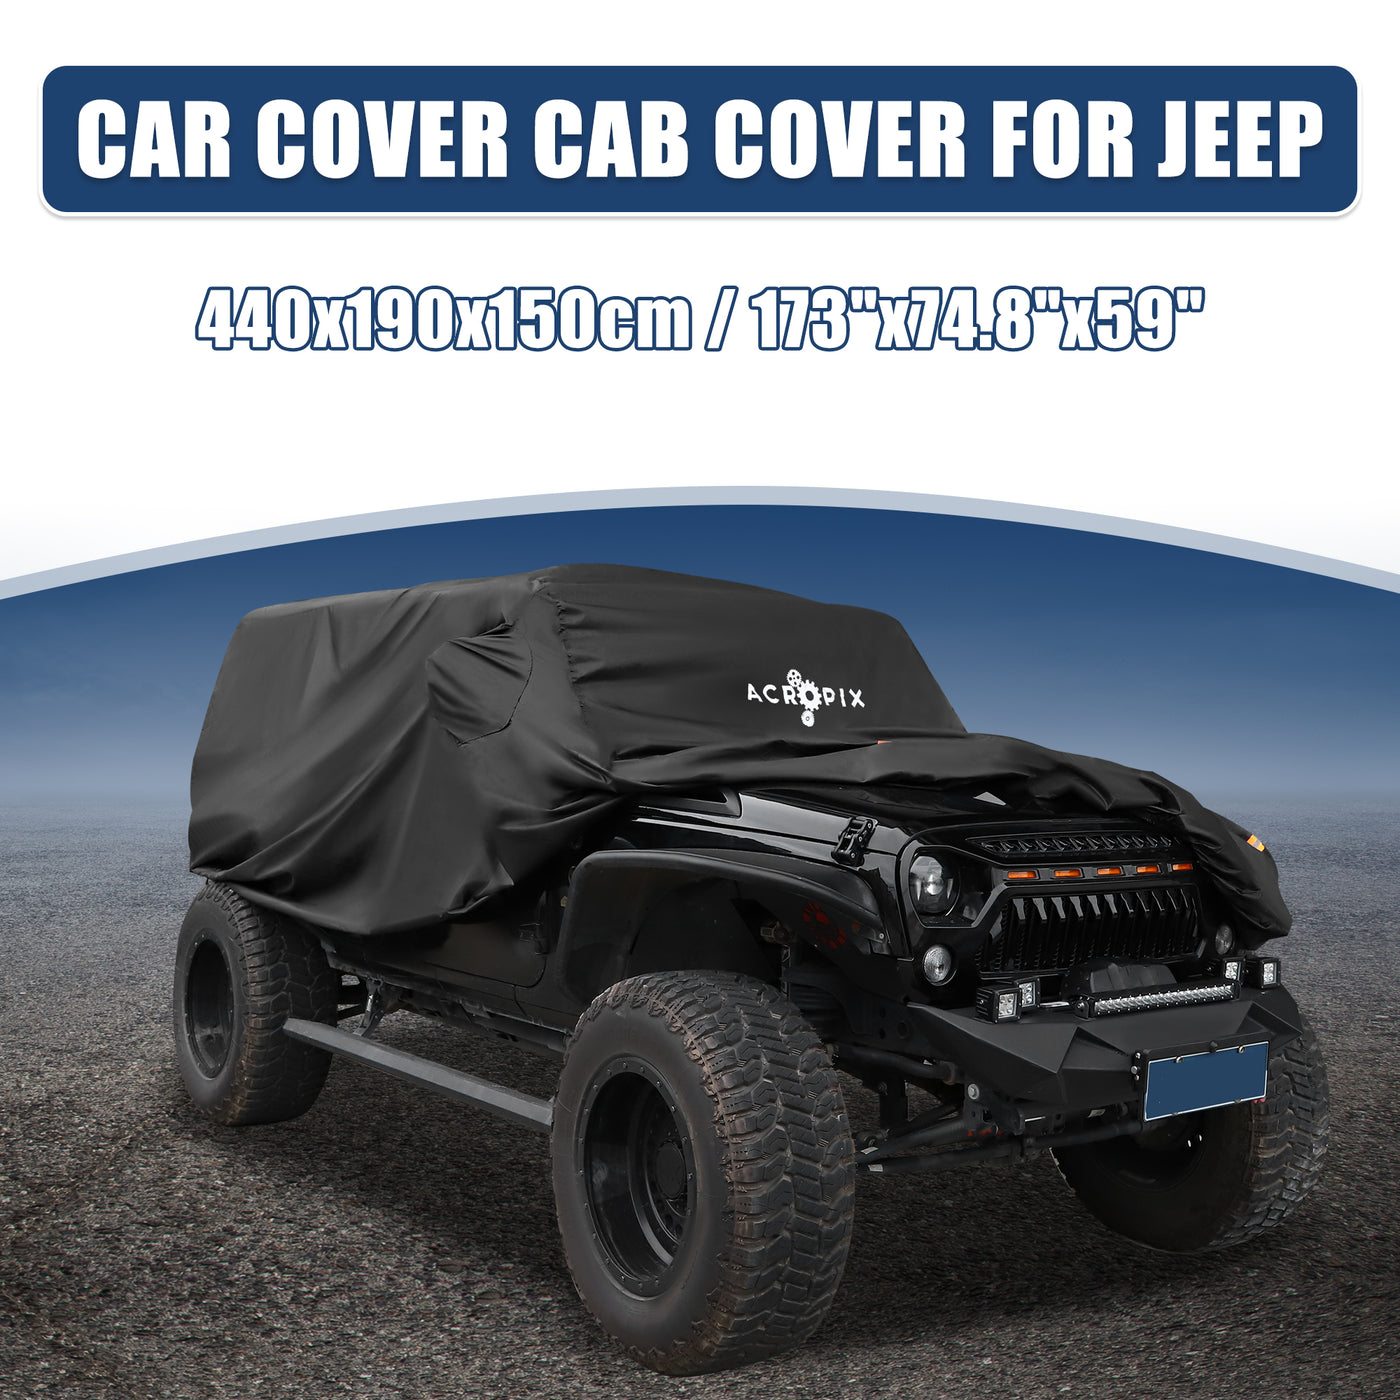 ACROPIX SUV Car Cover Fit for Jeep Wrangler JK JL 2 Door 2007-2017 with Driver Door Snow Rain All Weather Protection - Pack of 1 Black